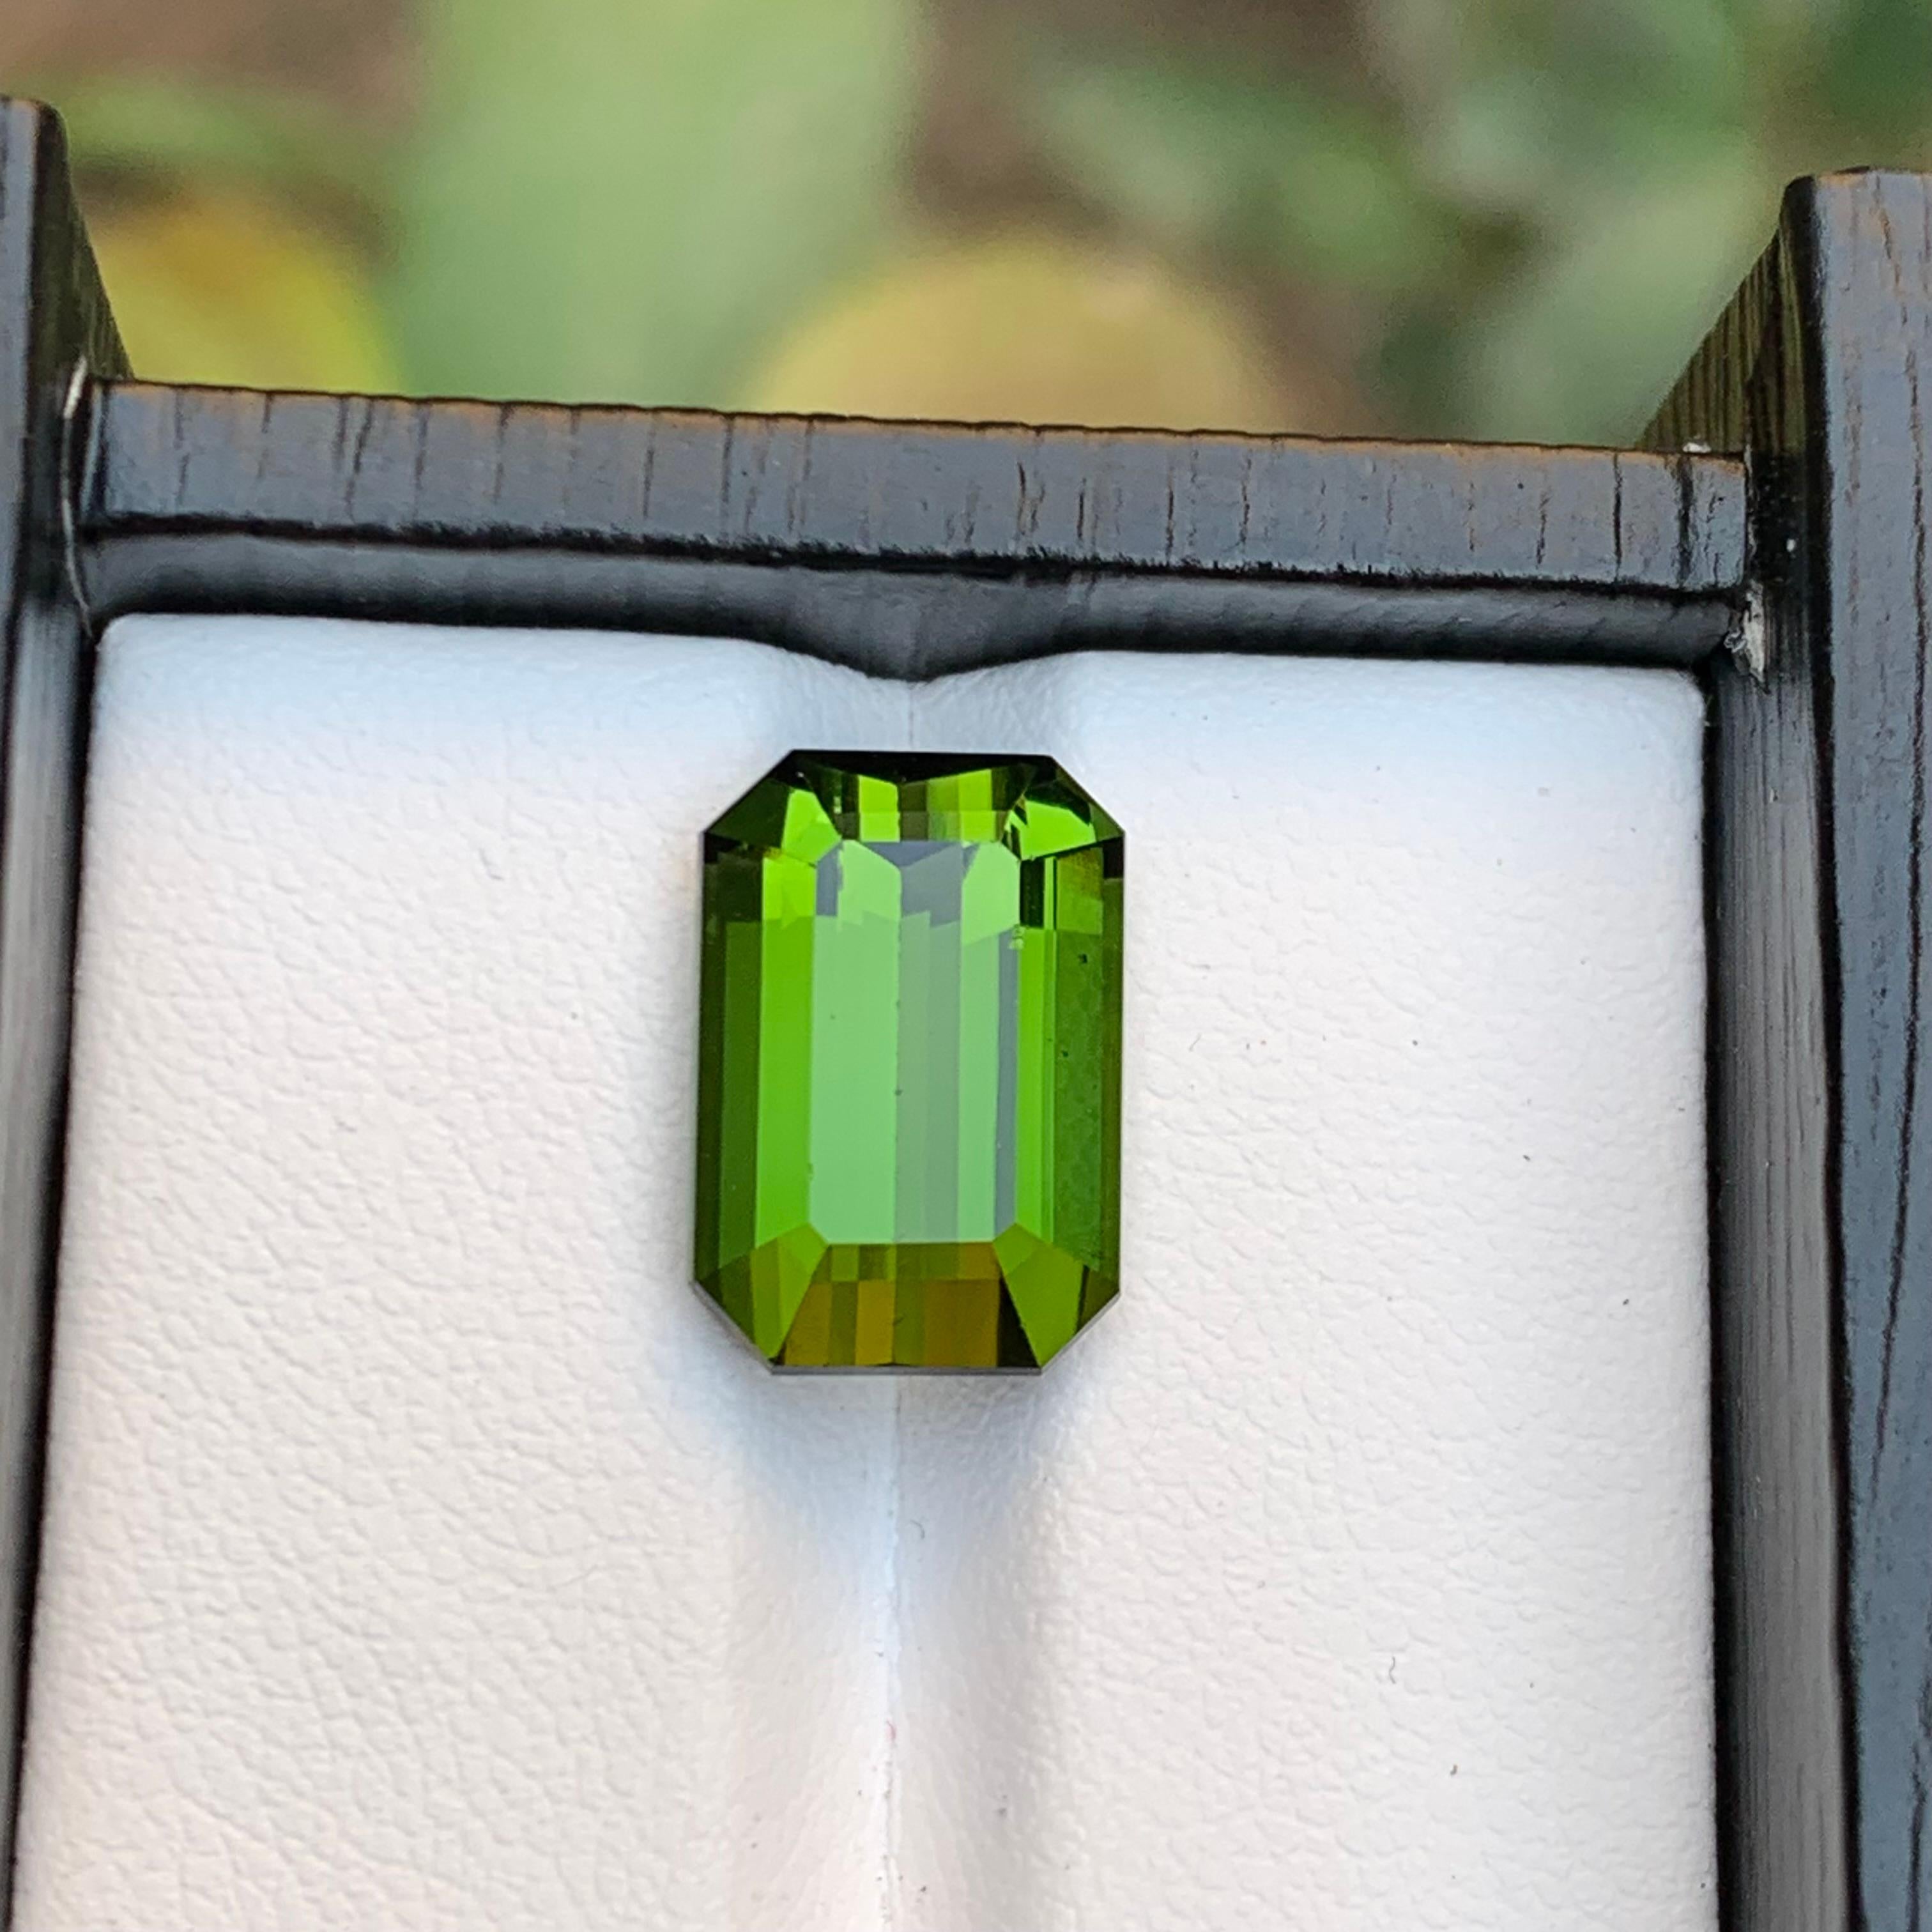 Rare Green Natural Tourmaline Loose Gemstone, 7.75 Ct-Emerald Cut Top Quality For Sale 7